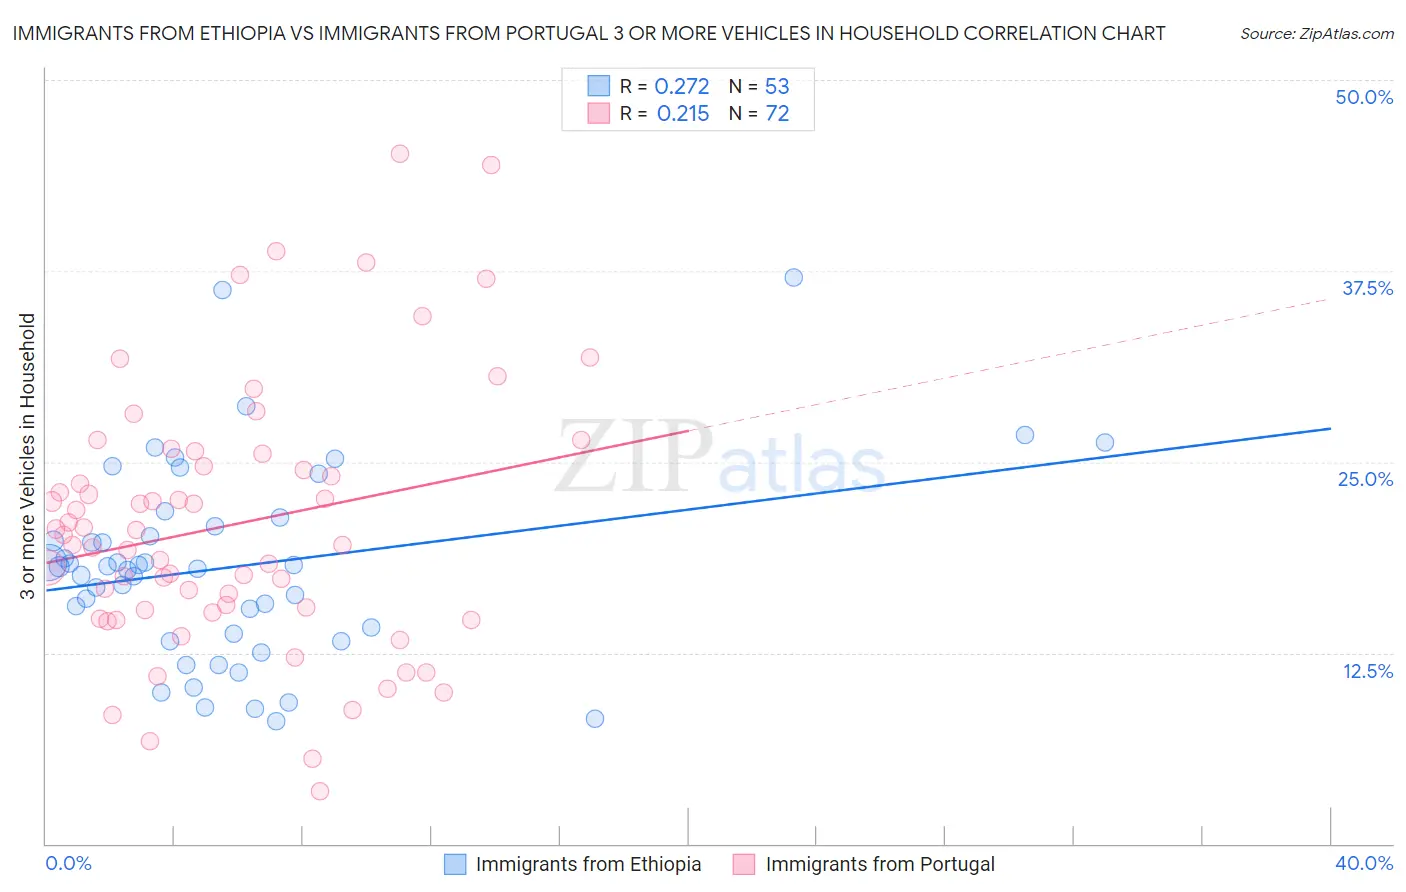 Immigrants from Ethiopia vs Immigrants from Portugal 3 or more Vehicles in Household